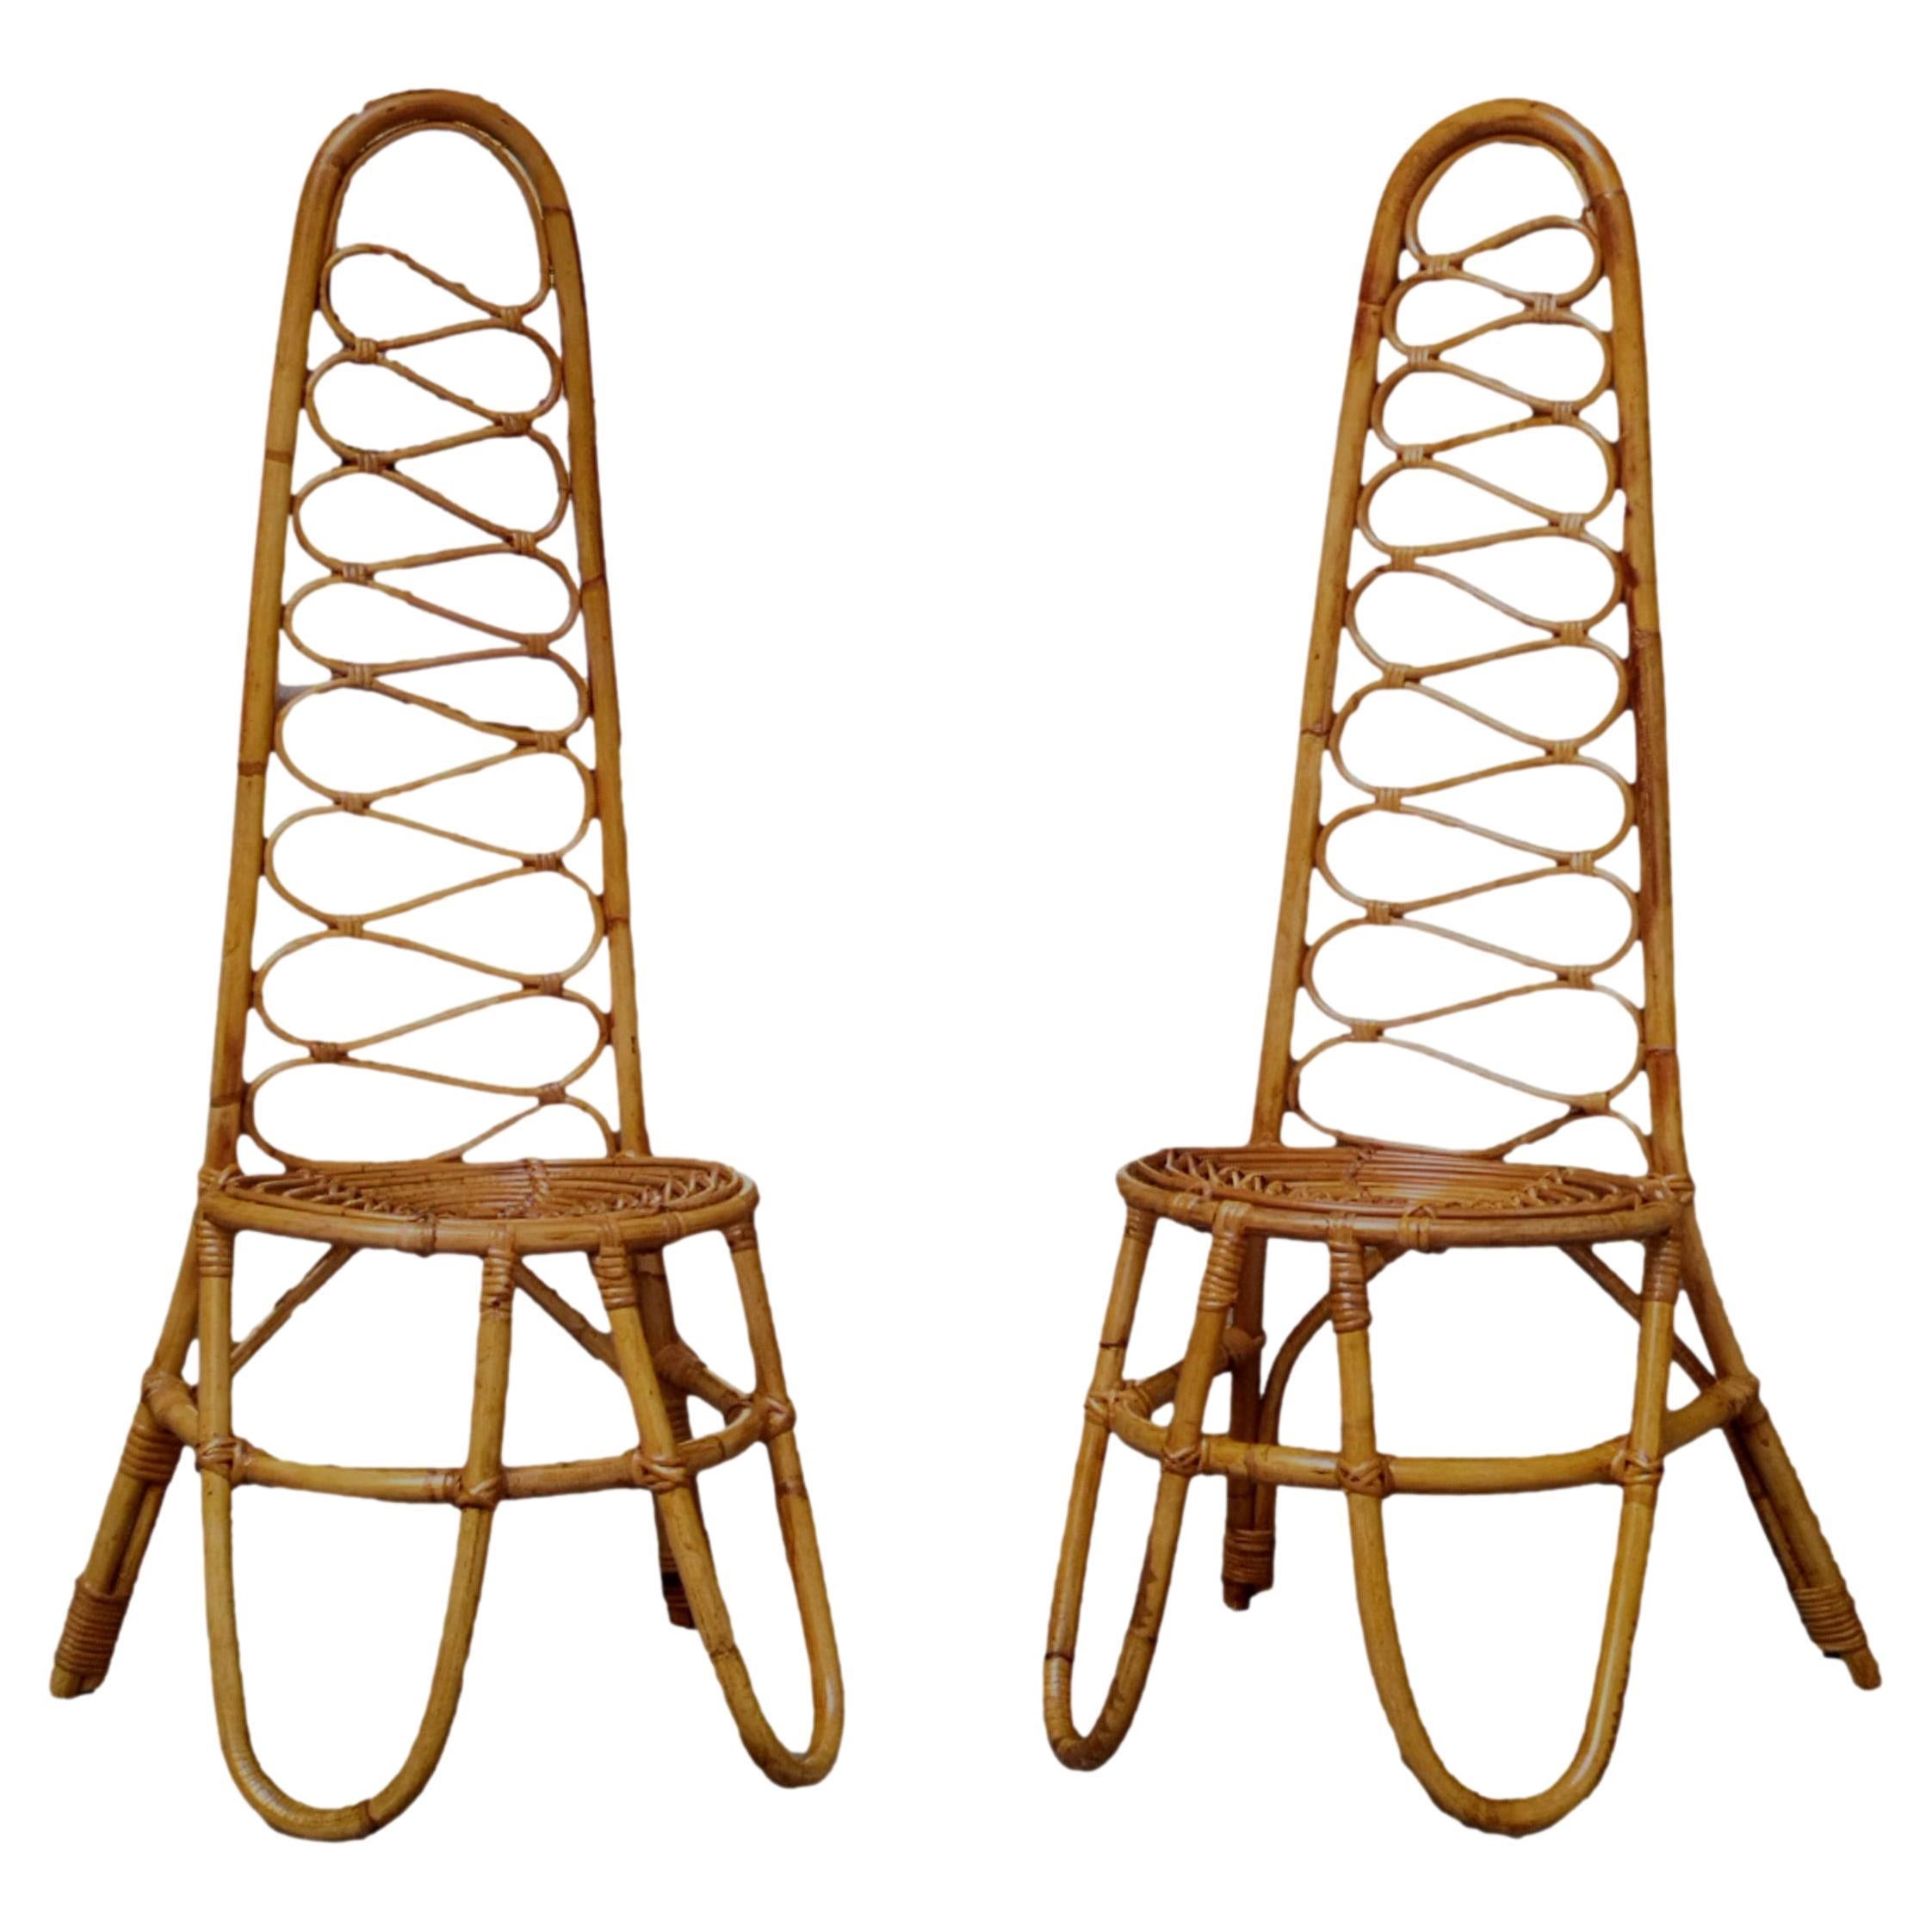 Bonacina Attrib. Pair of Rattan and Bamboo Hight-Backed Chairs, Italy, 1960s For Sale